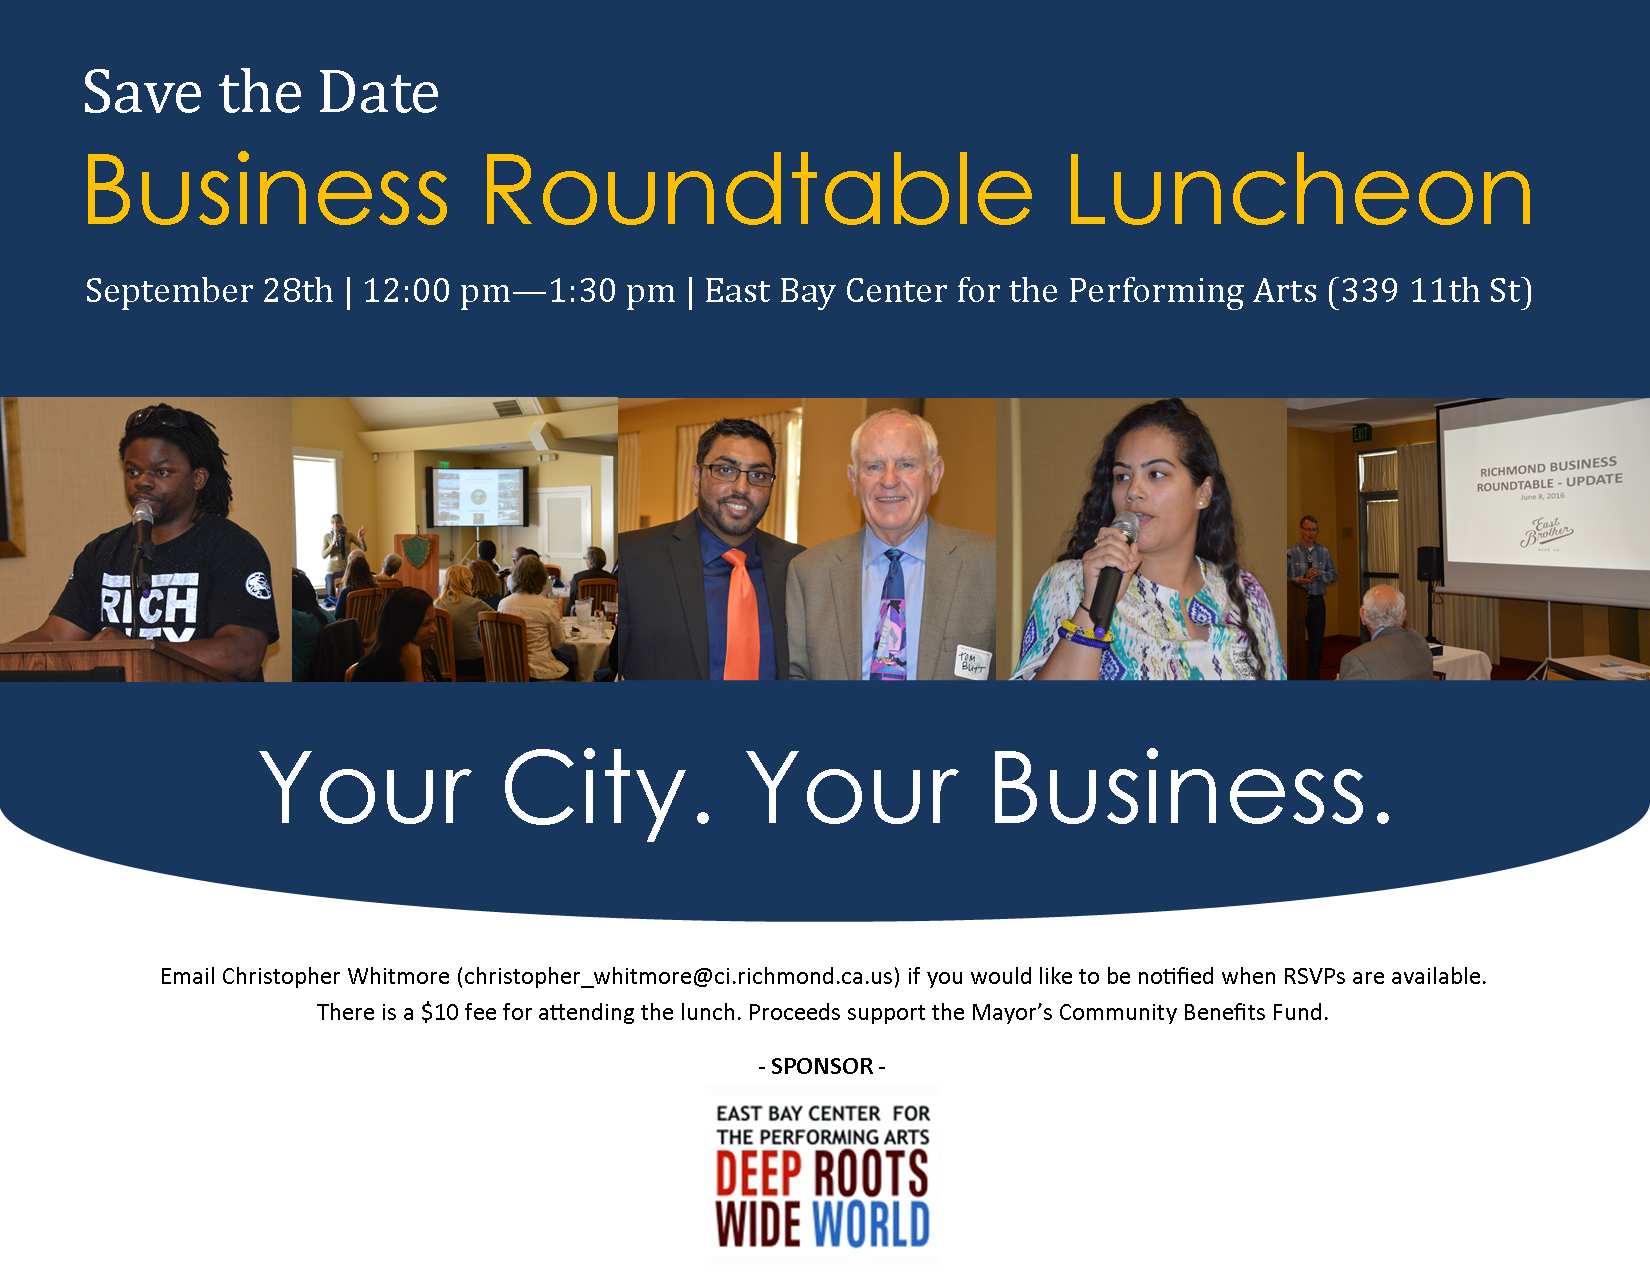 Save the Date - Business Roundtable Flyer (2)